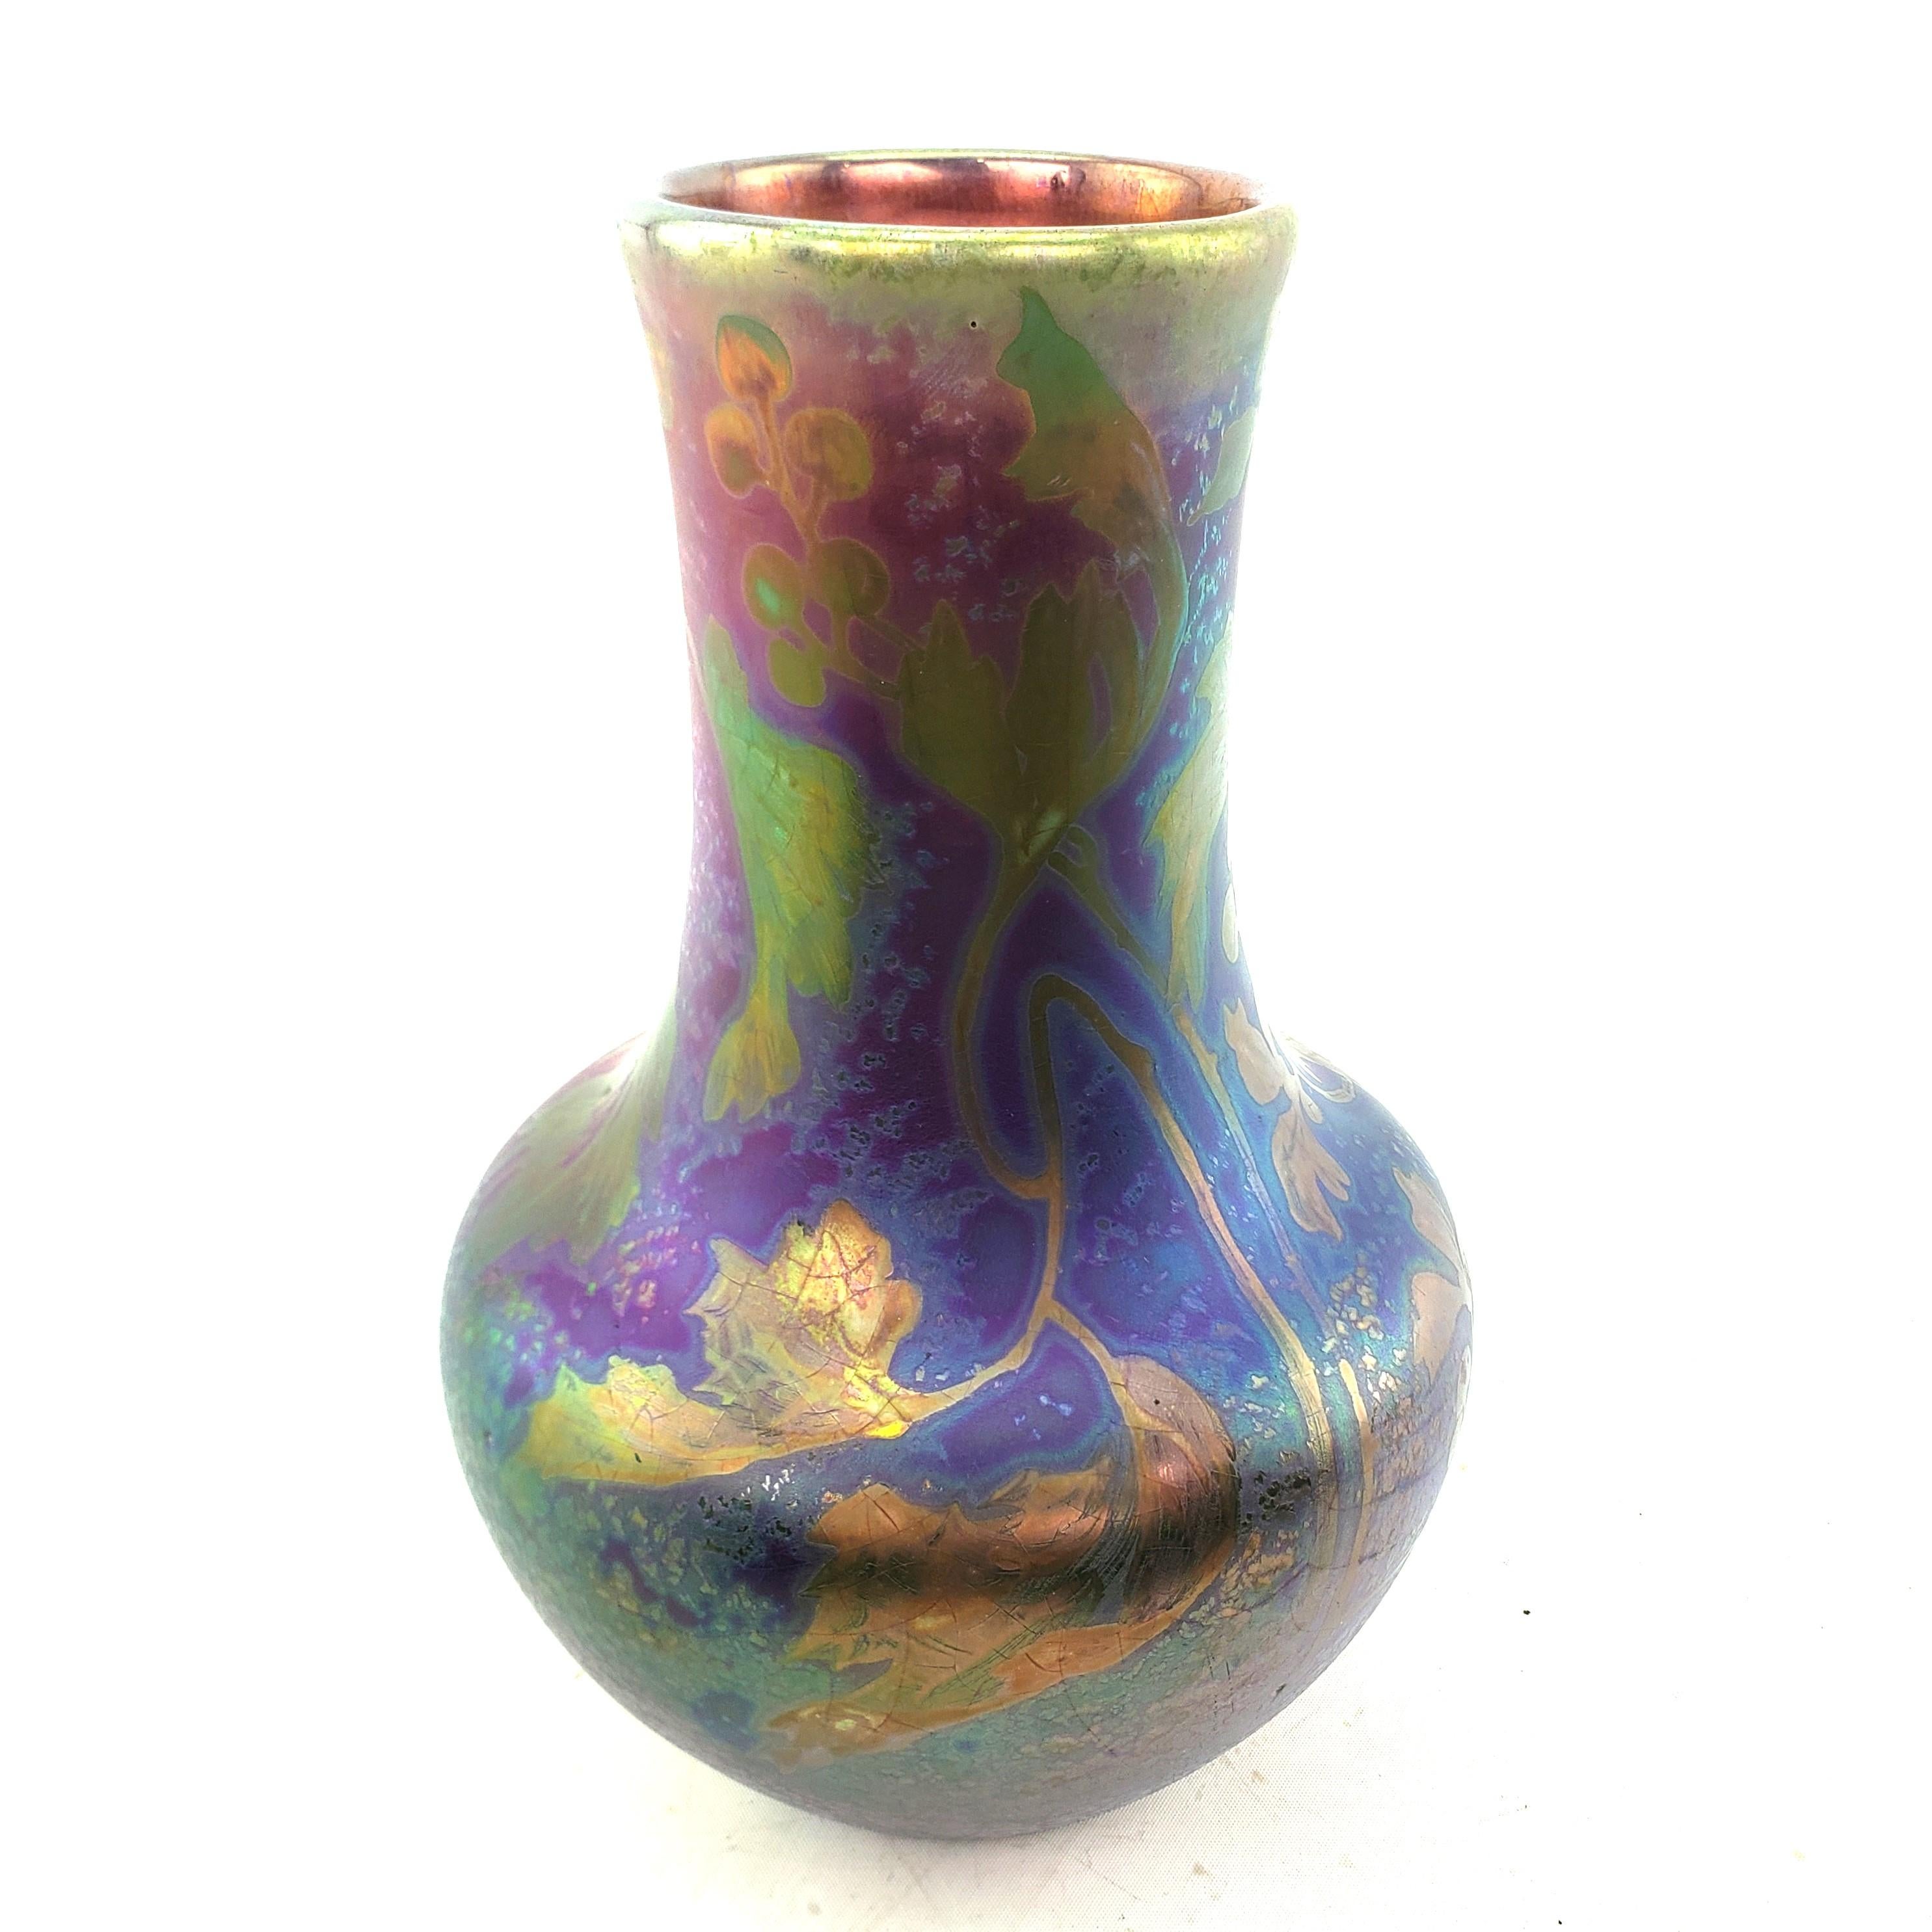 This vase was made by the renowned Weller Pottery factory of the United States in approximately 1910 in the period Art Nouveau style. The vase is done with a high irridescent cobalt blue, green and purple with stylized floral decoration with a gloss